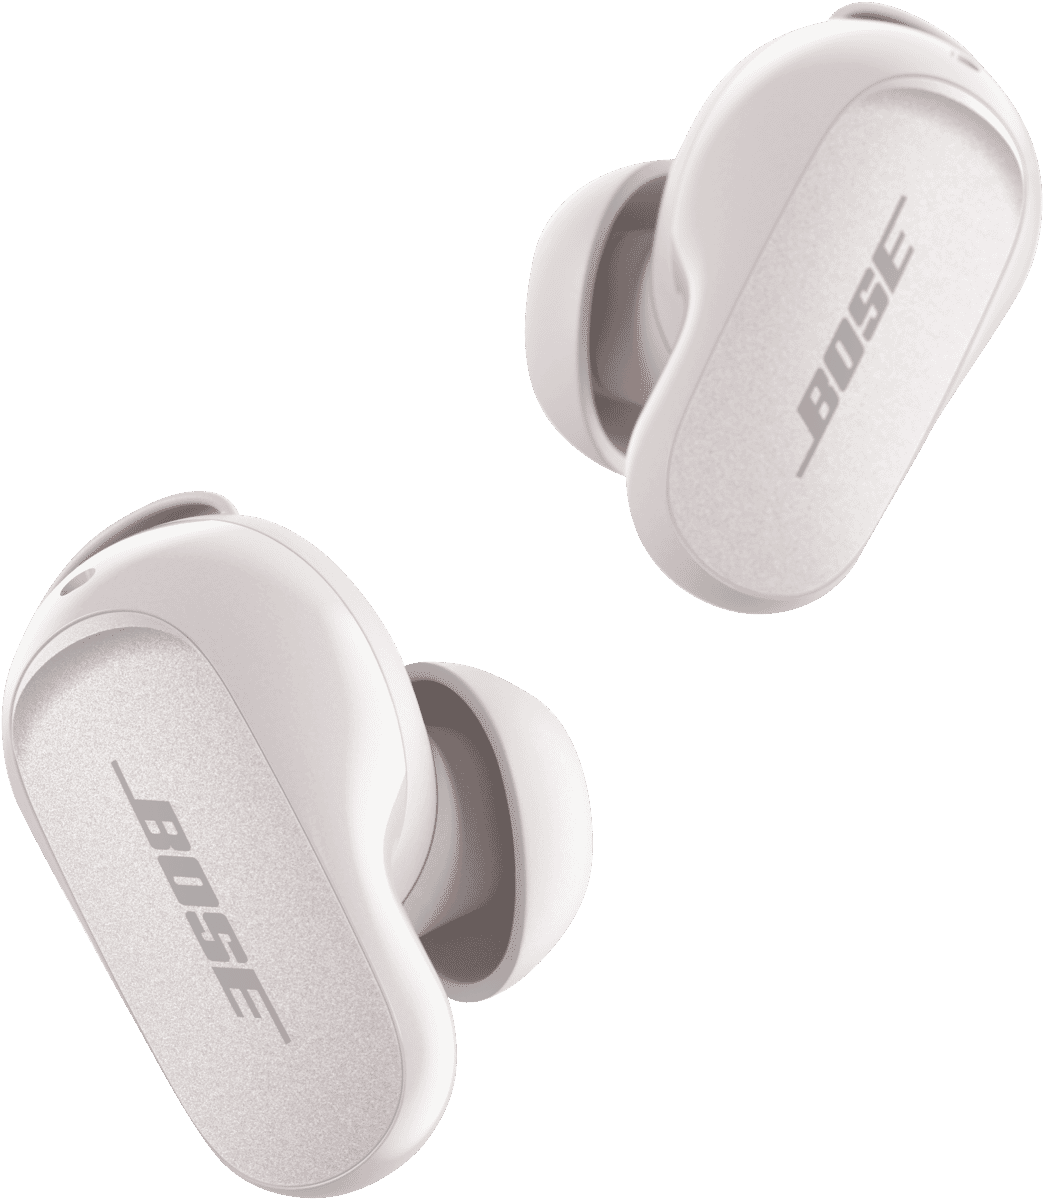 Bose  QuietComfort Earbuds II   Soapstone at The Good Guys